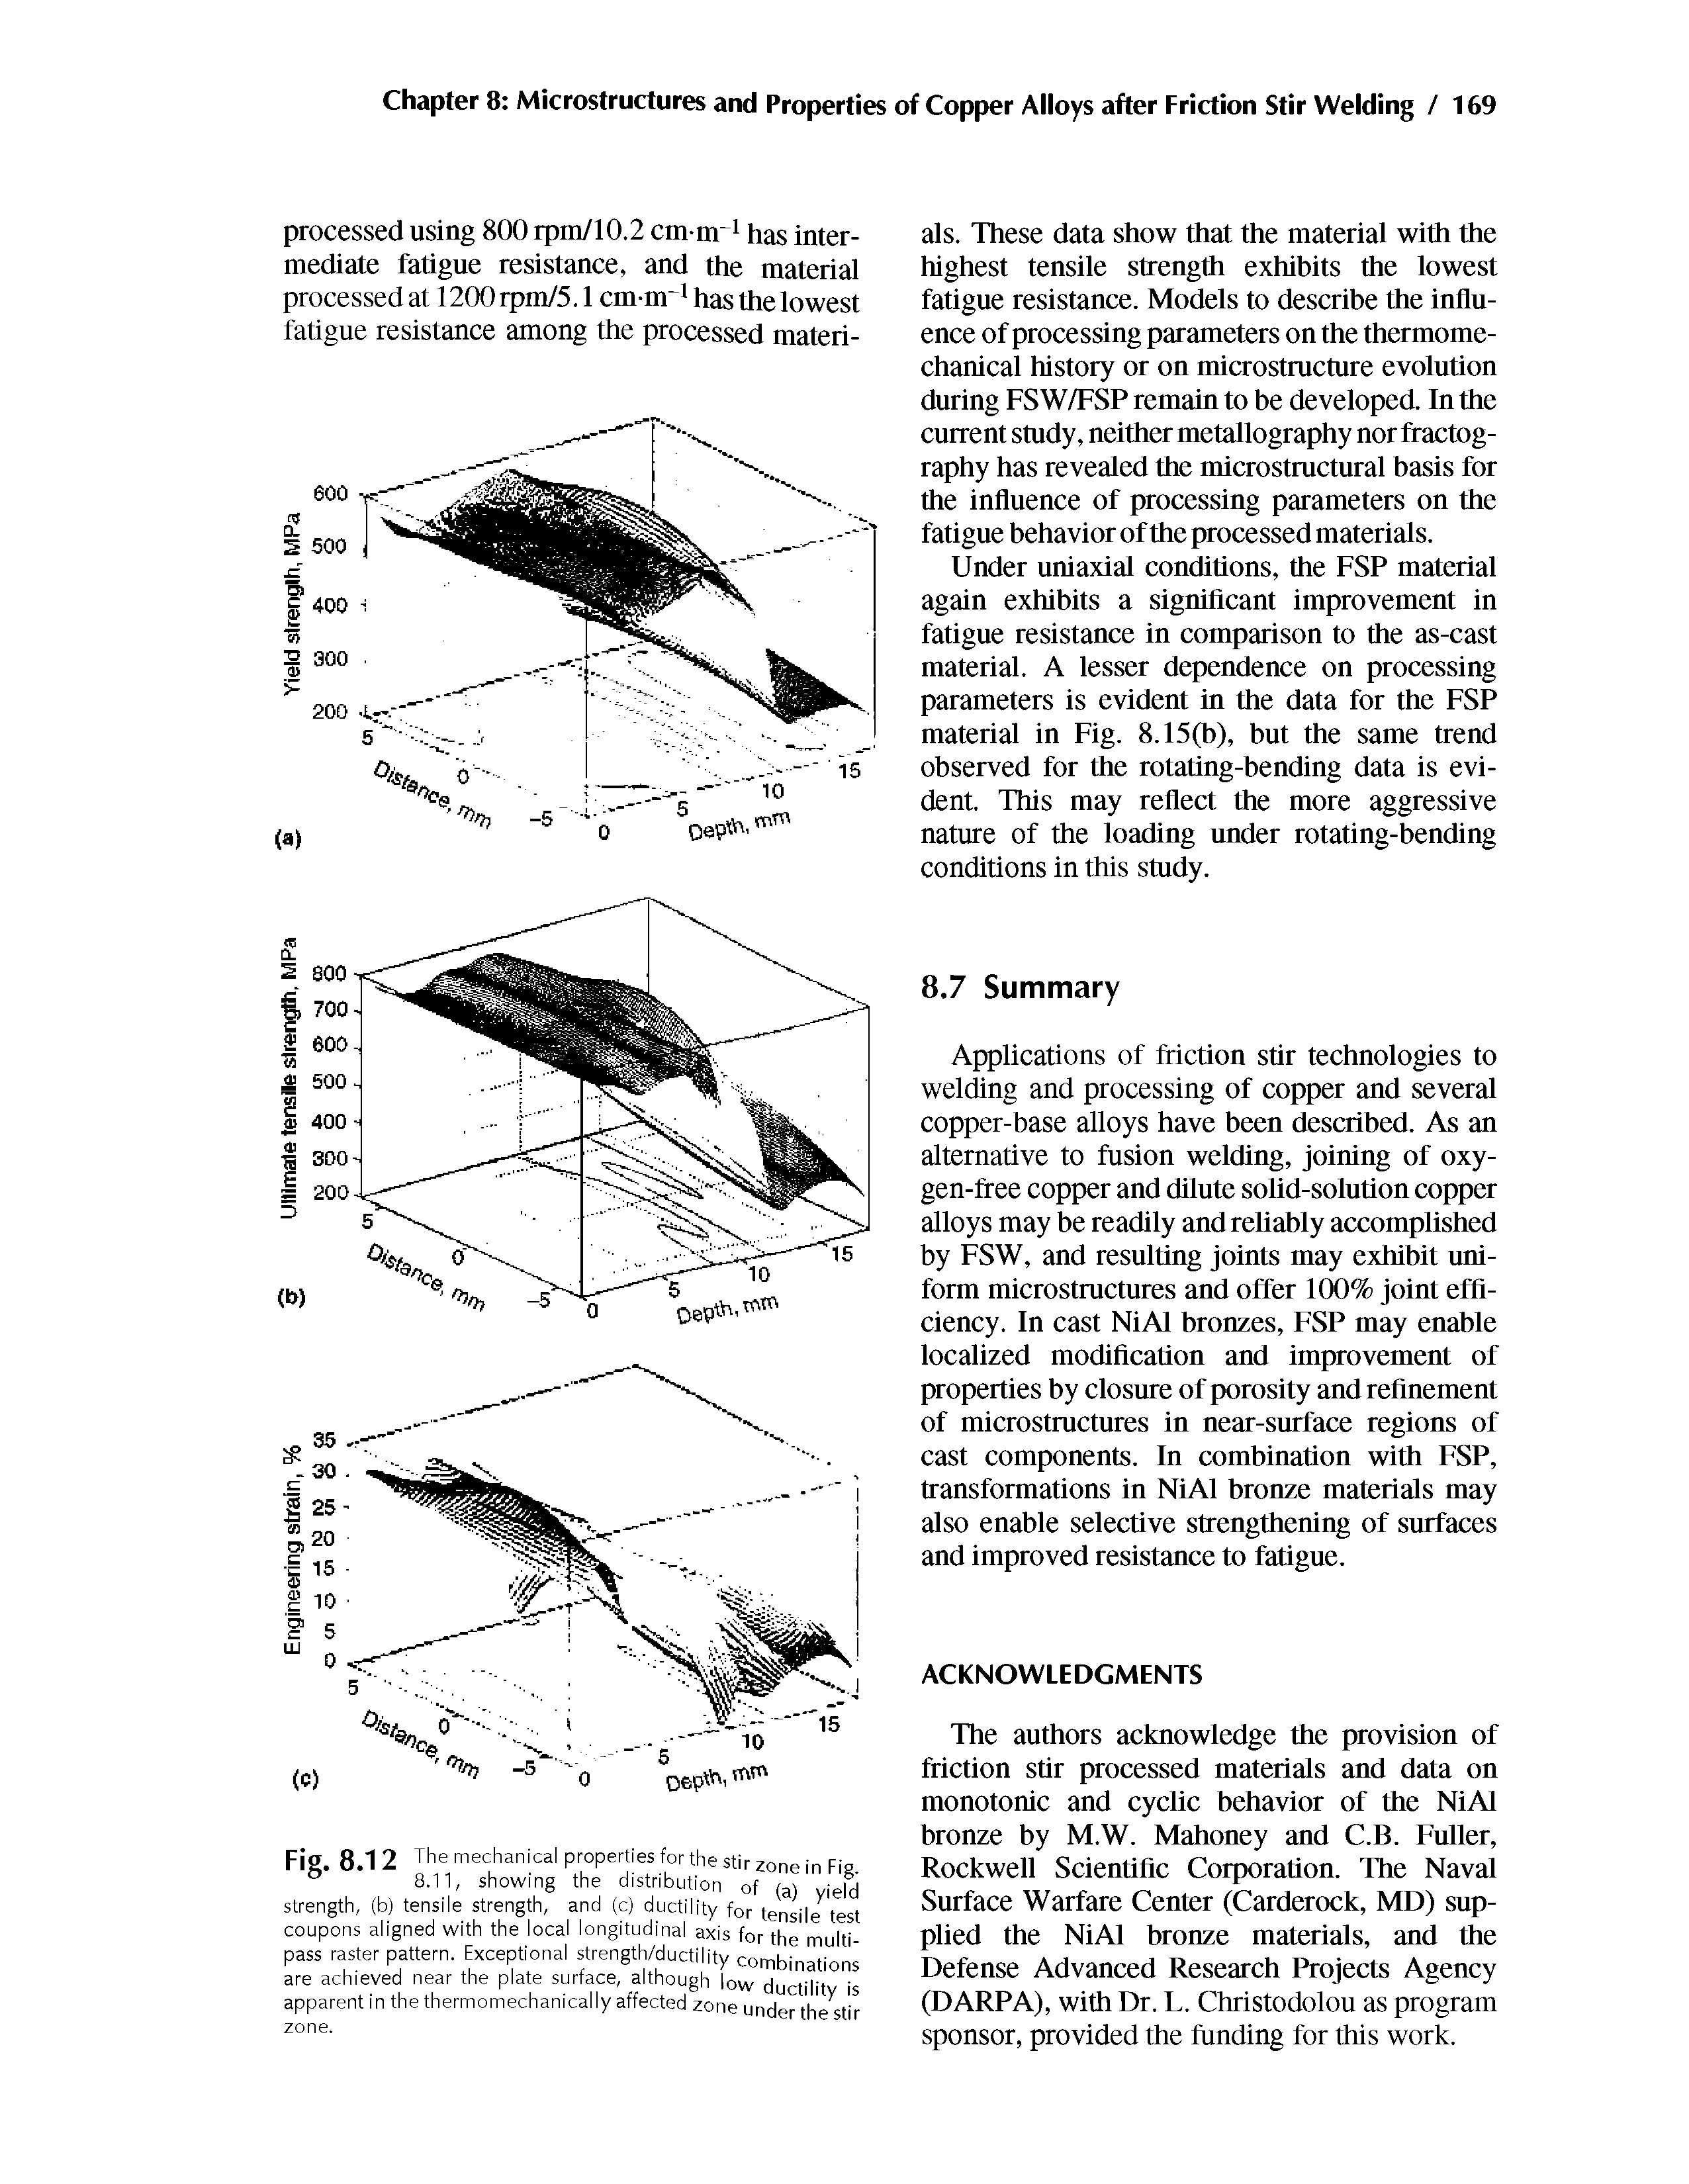 Fig. 8.1 2 The mechanical properties for the stir zone in Fig 8.11, showing the distribution of (a) yield strength, (b) tensile strength, and (c) ductility for tensile test coupons aligned with the local longitudinal axis for the multipass raster pattern. Exceptional strength/ductility combinations are achieved near the plate surface, although low dii tTt apparent in the thermomechanically affected zone under the stir...